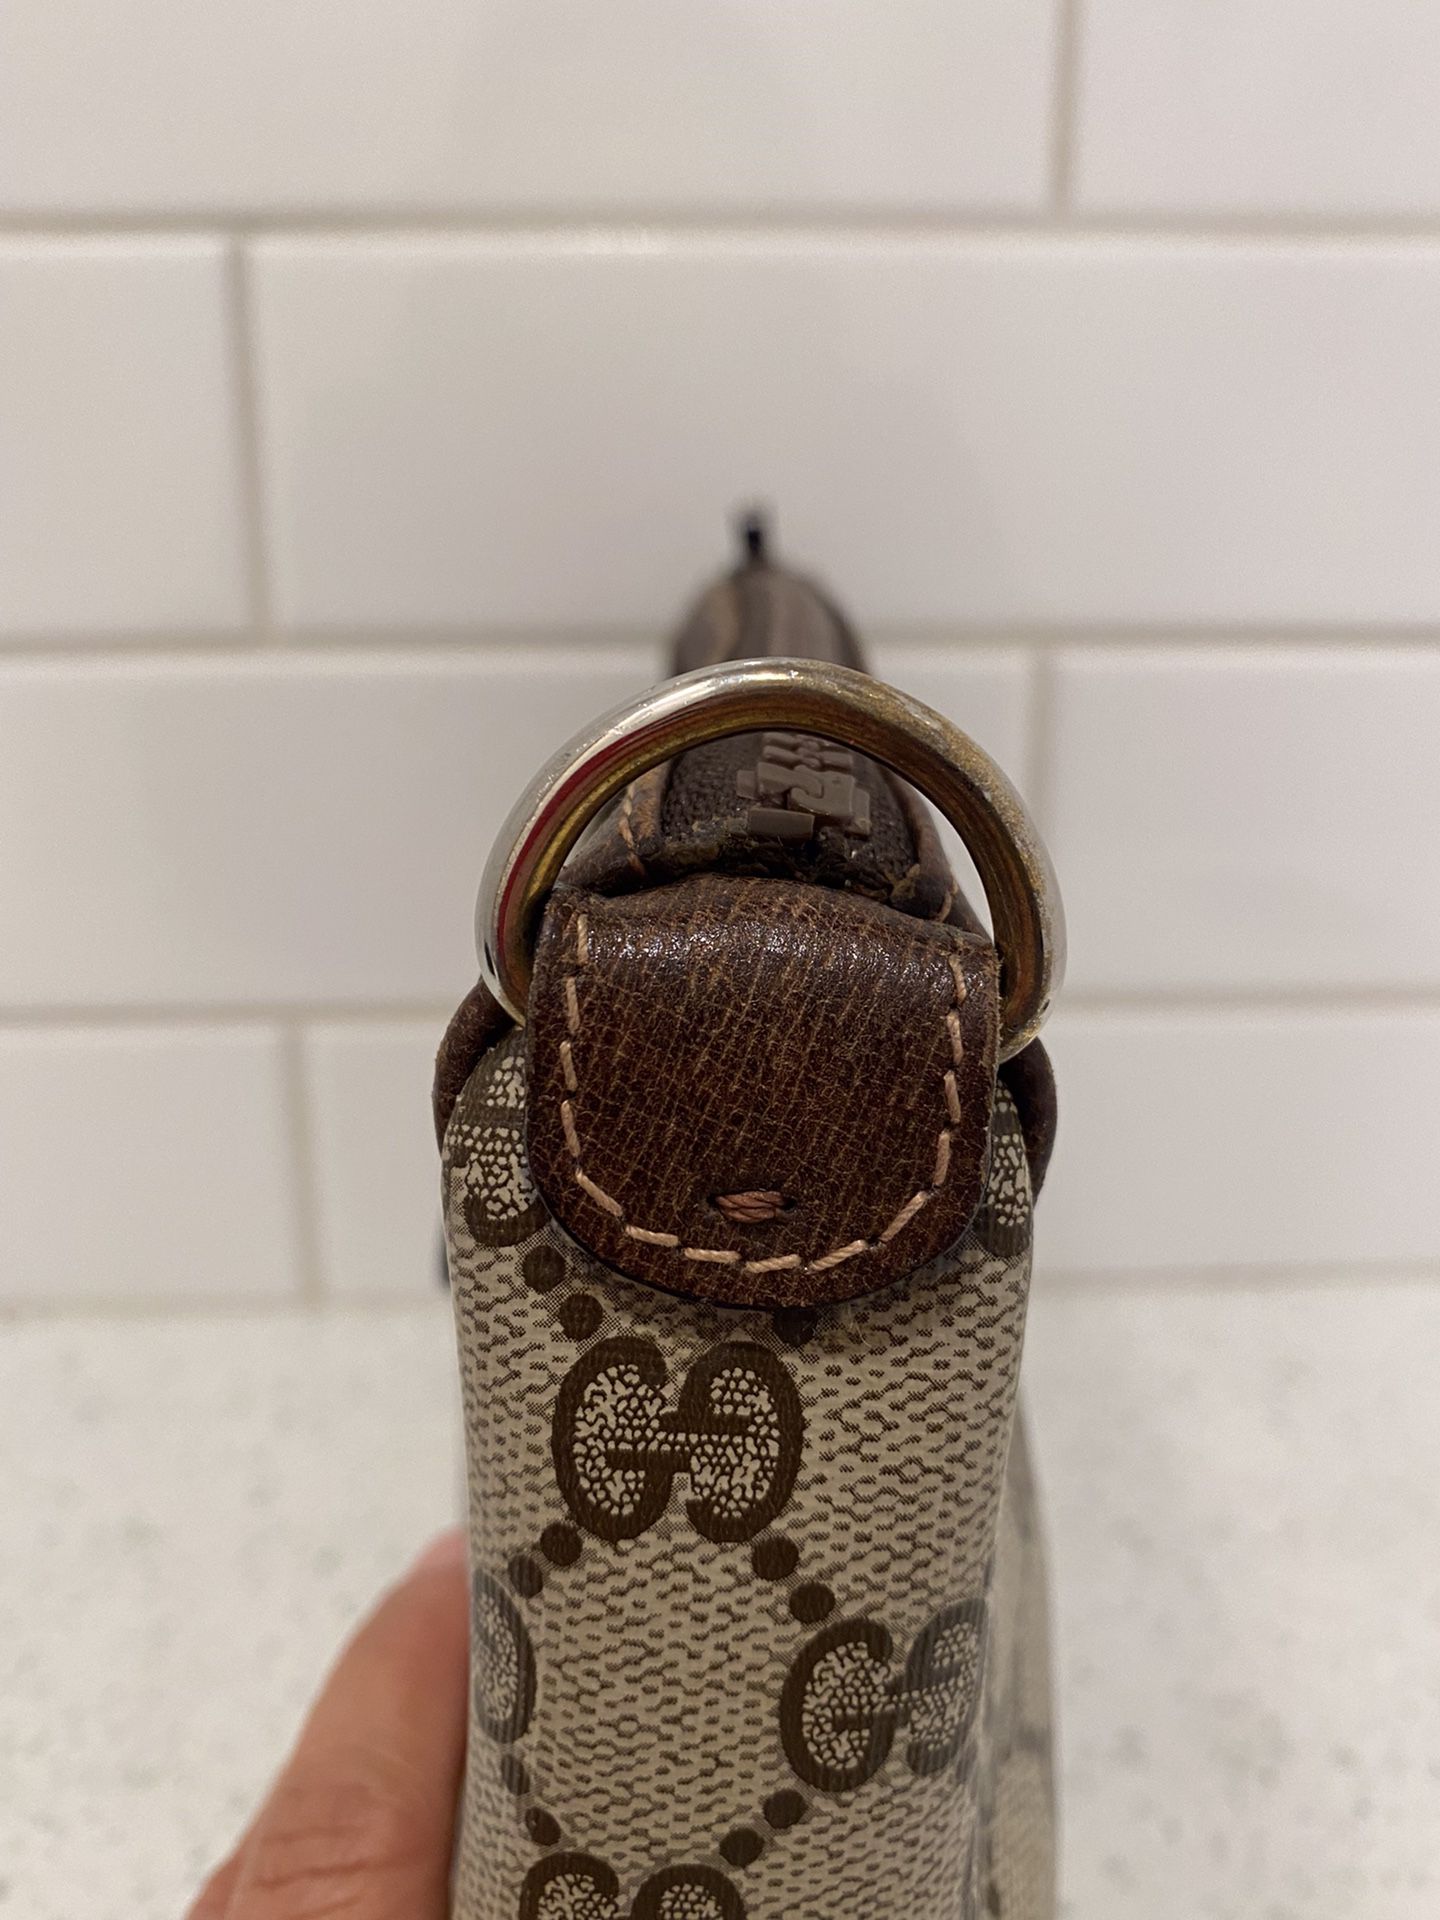 Authentic Gucci Handbag - Red Accent for Sale in Morrow, GA - OfferUp